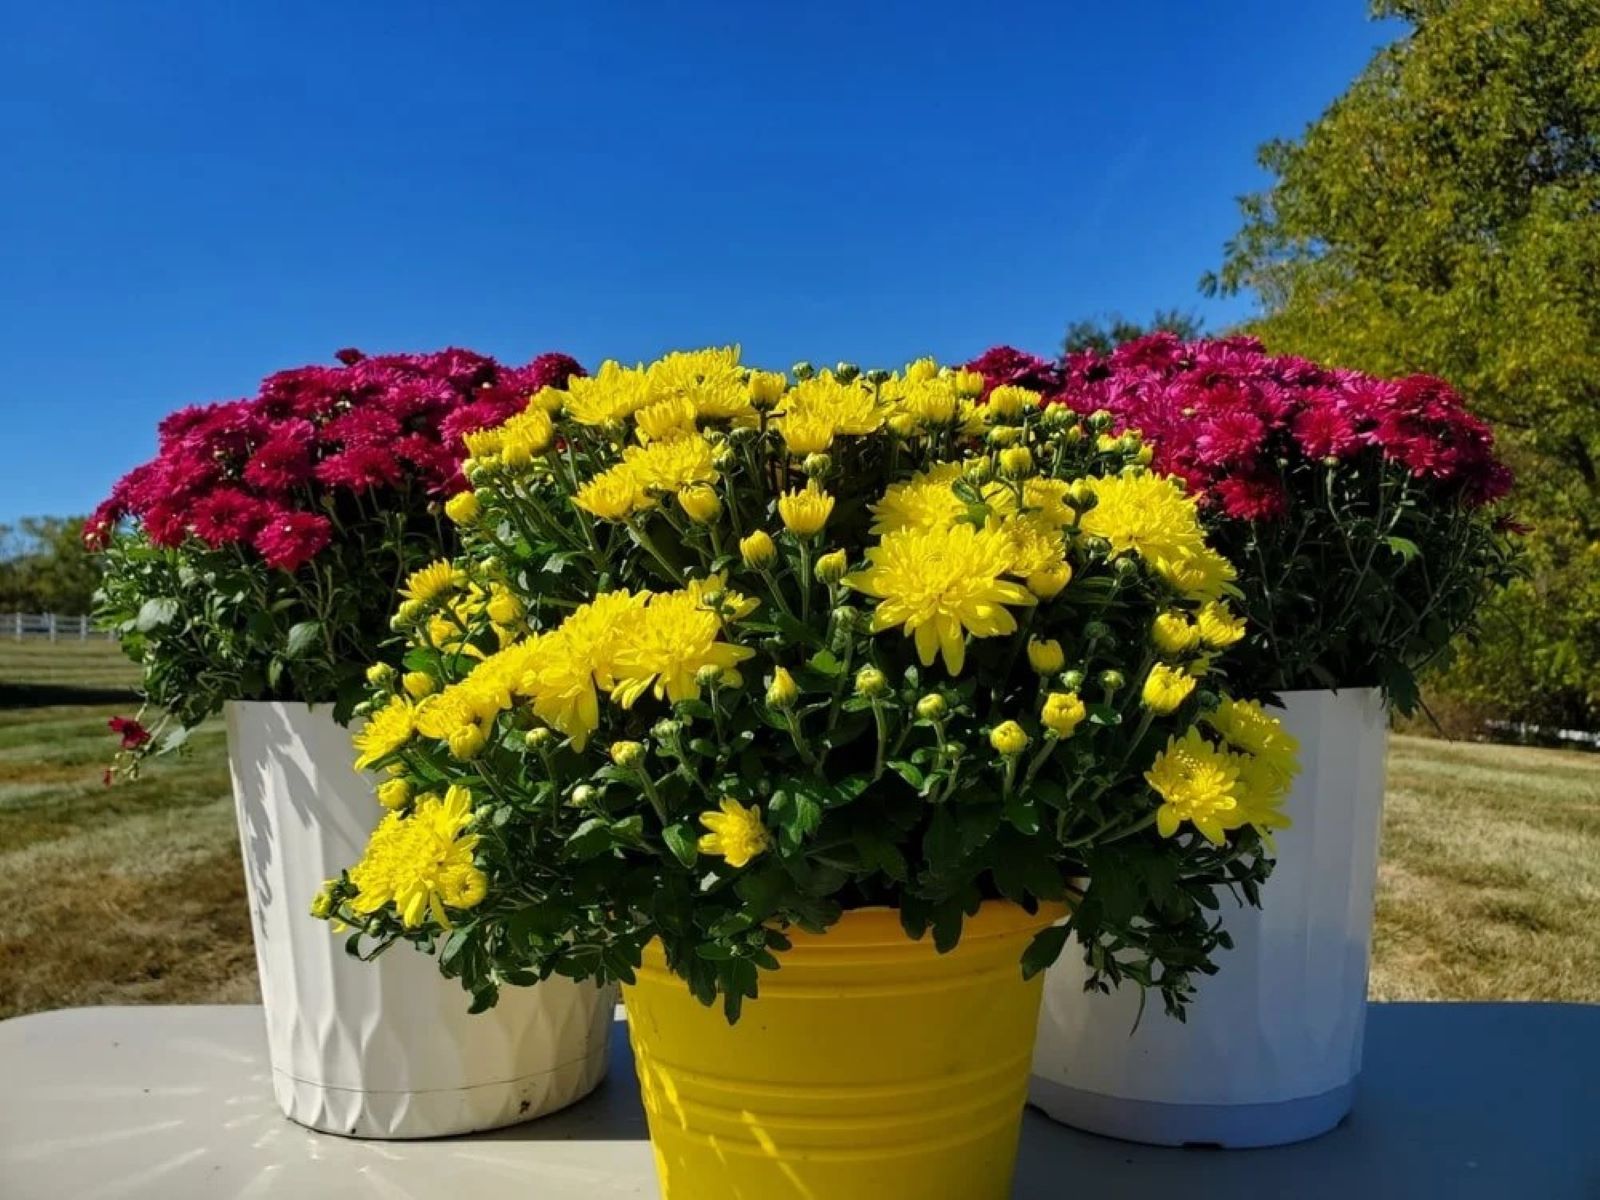 How To Care For Mums In Pots Outdoors